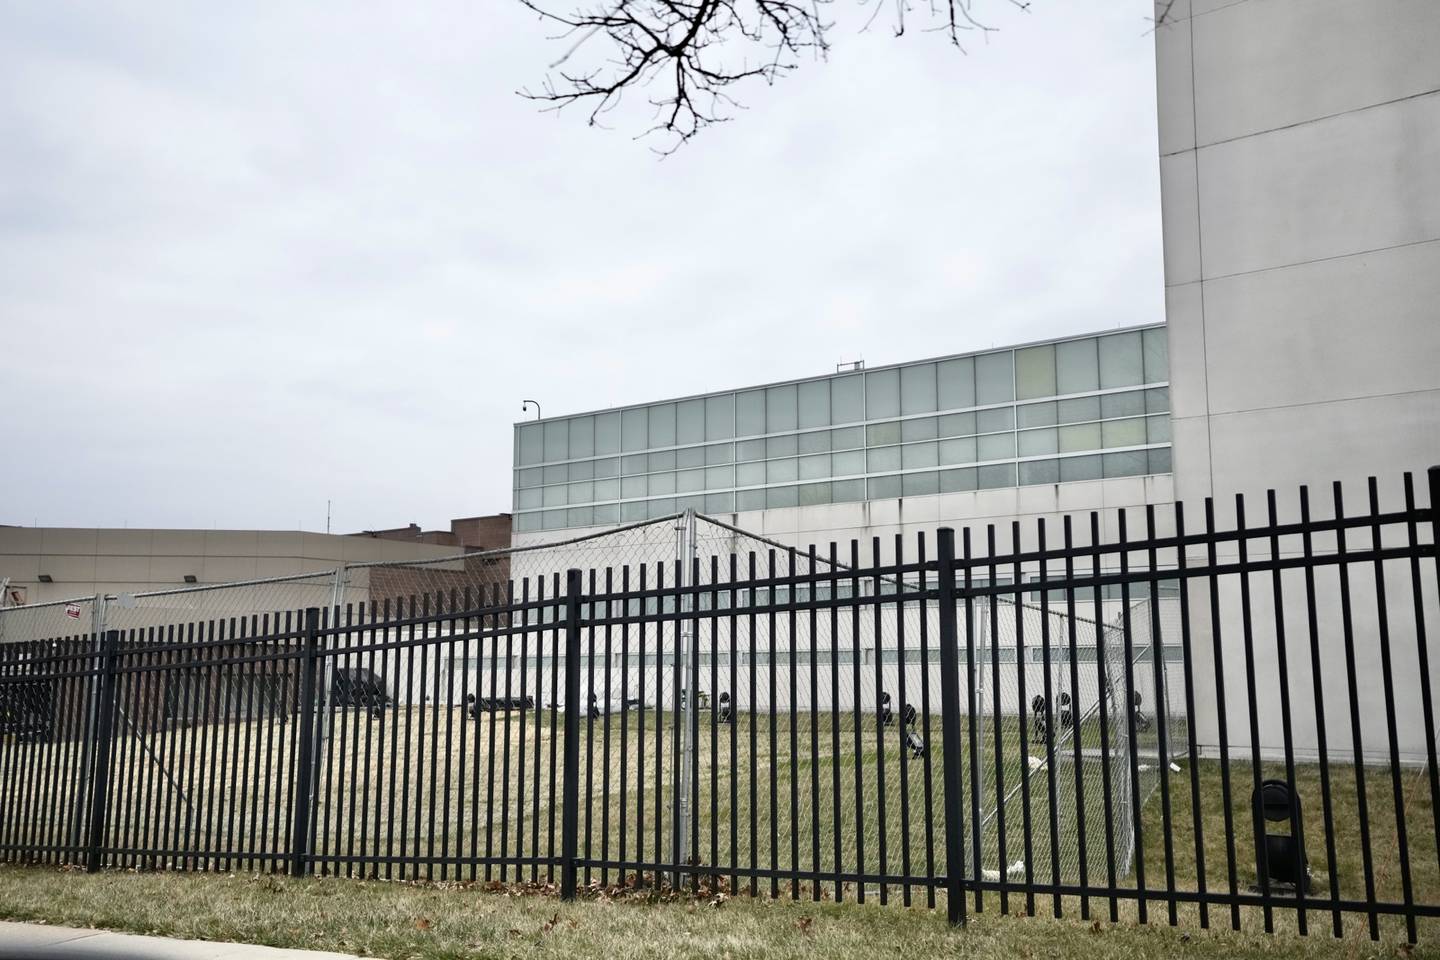 The gray exterior of the Baltimore County Detention Center can be seen behind a black metal fence.